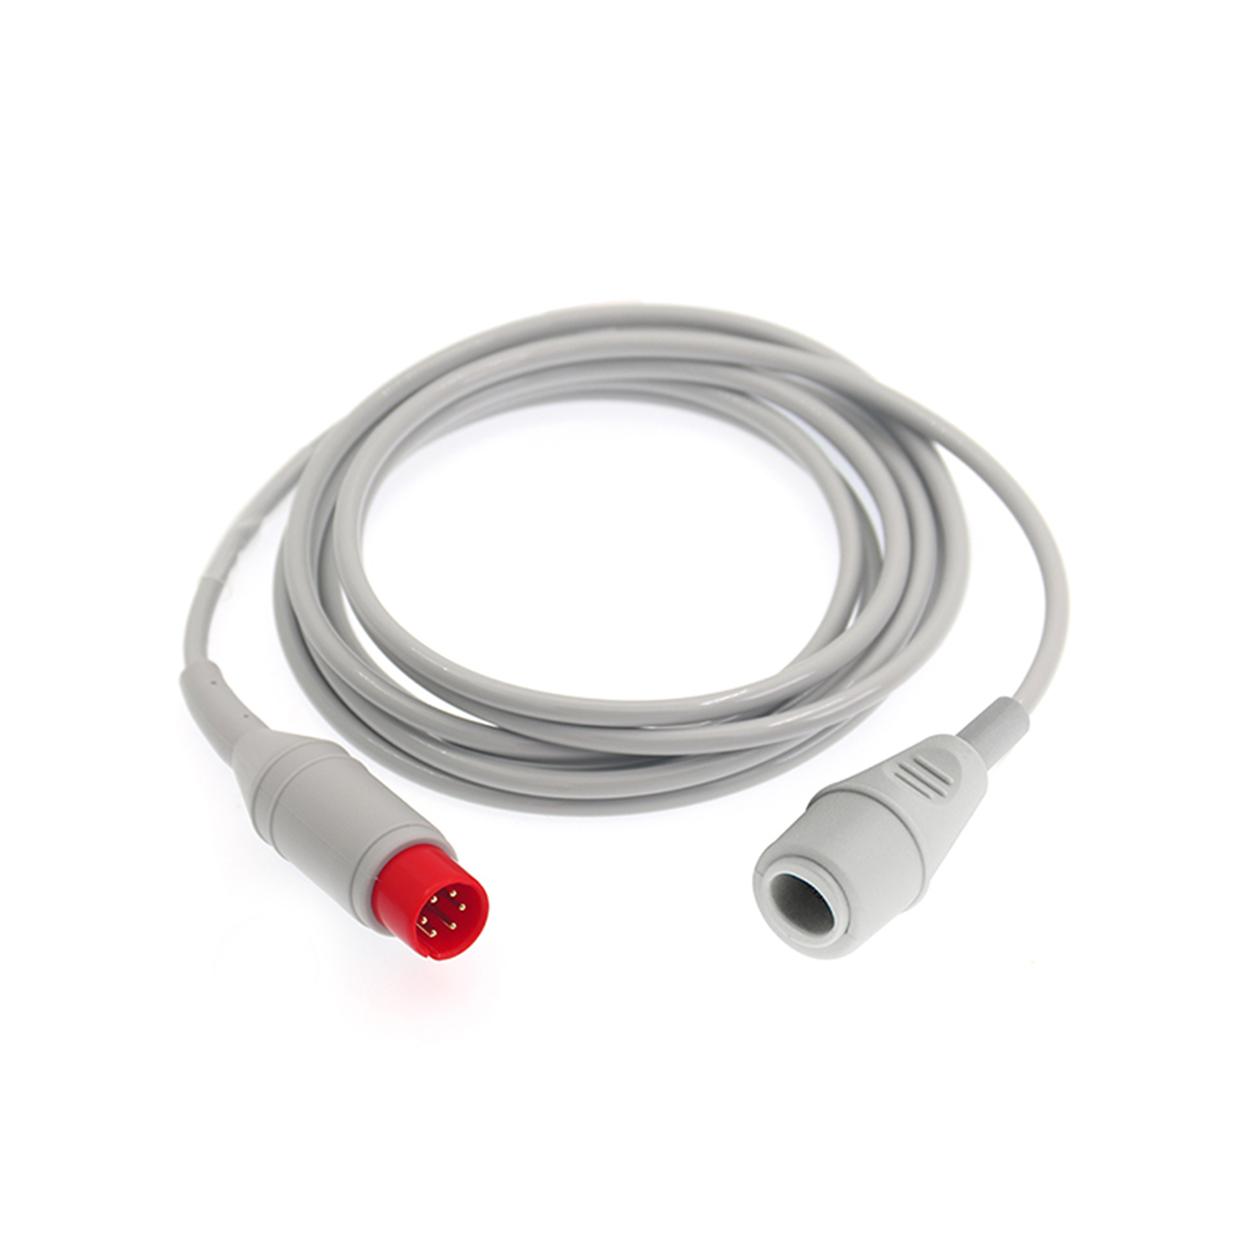 Philips Edward IBP adaptor cable